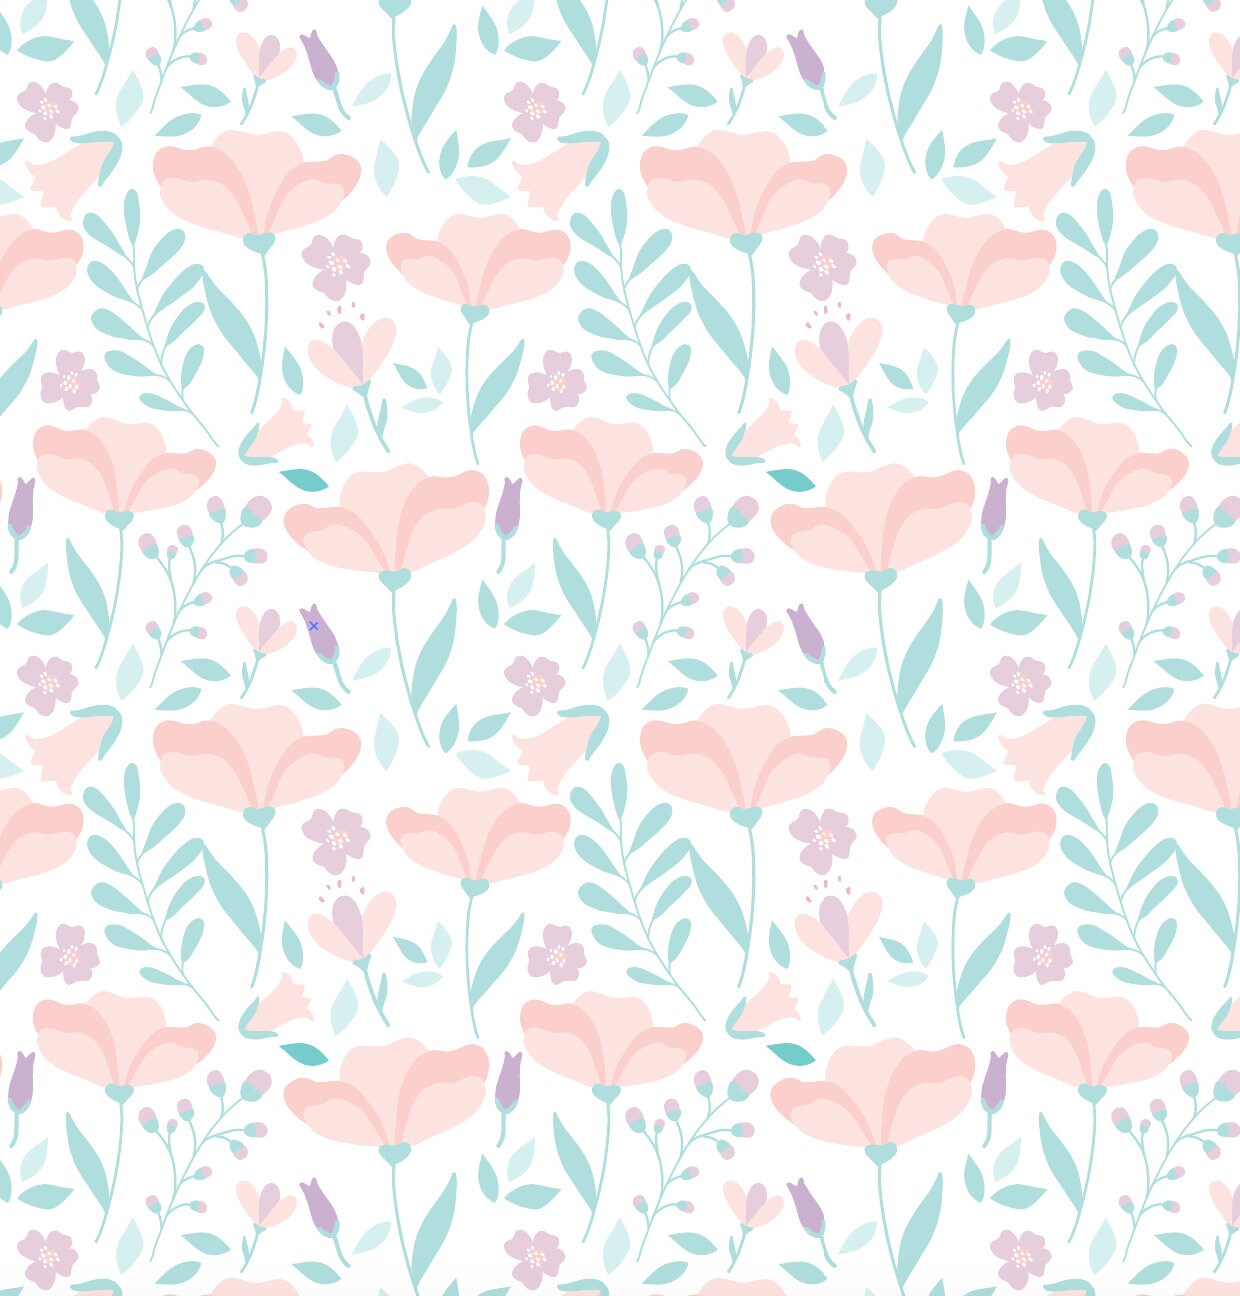 Peel and Stick Wallpaper Floral/ Blush and Mint Wildflower Wallpaper/ Removable Wallpaper/ Unpasted Wallpaper/ Pre-Pasted Wallpaper WW2064